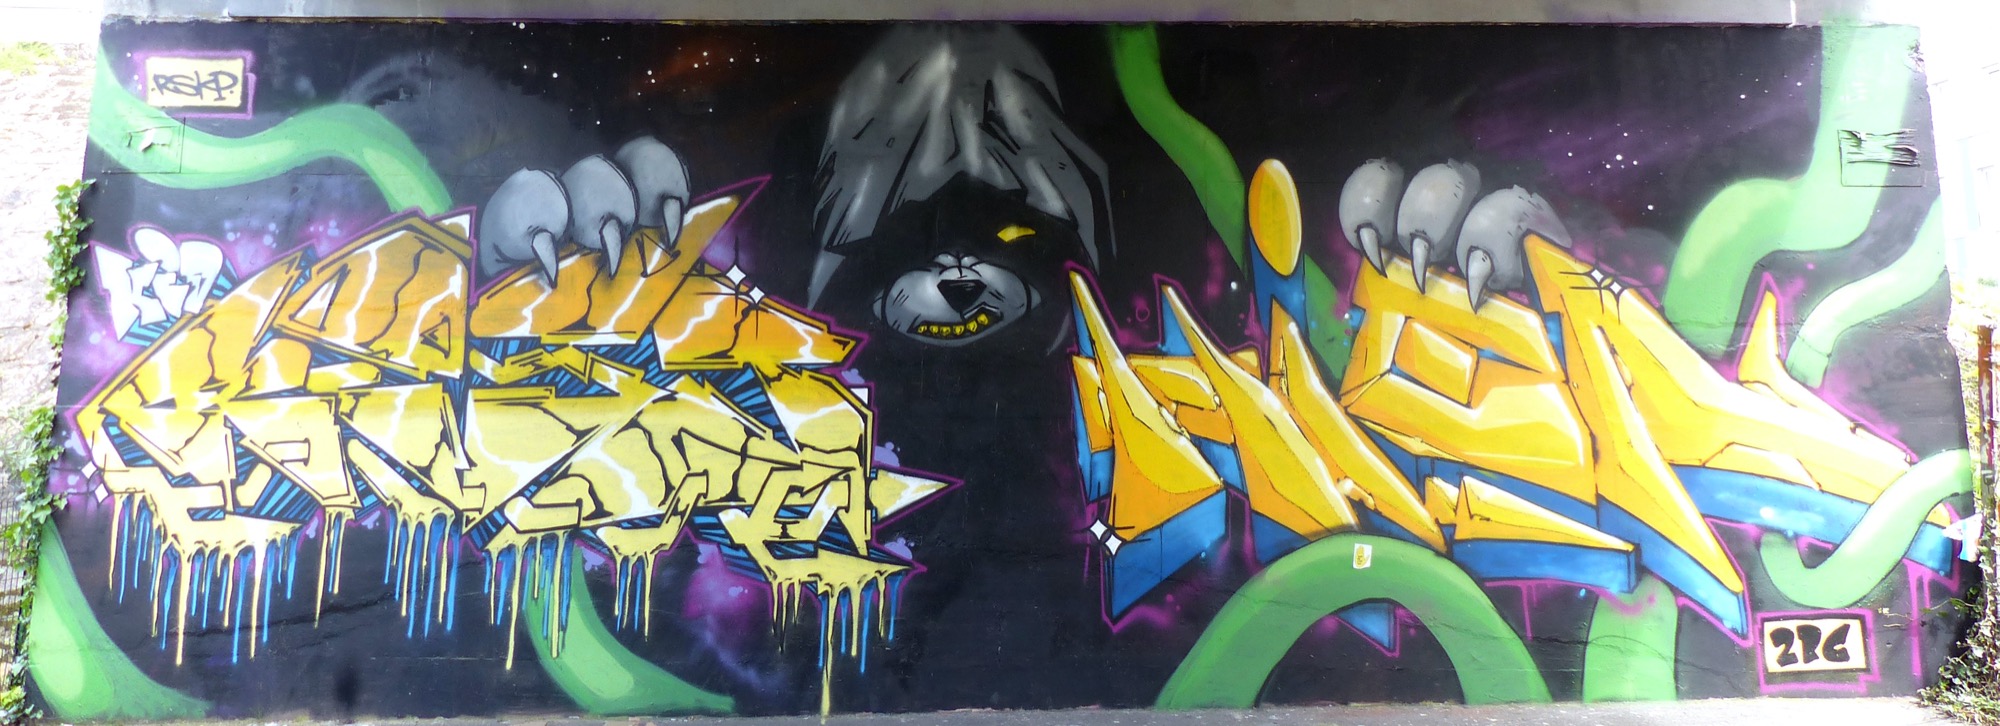 Graffiti 73  captured by Rabot in Nantes France